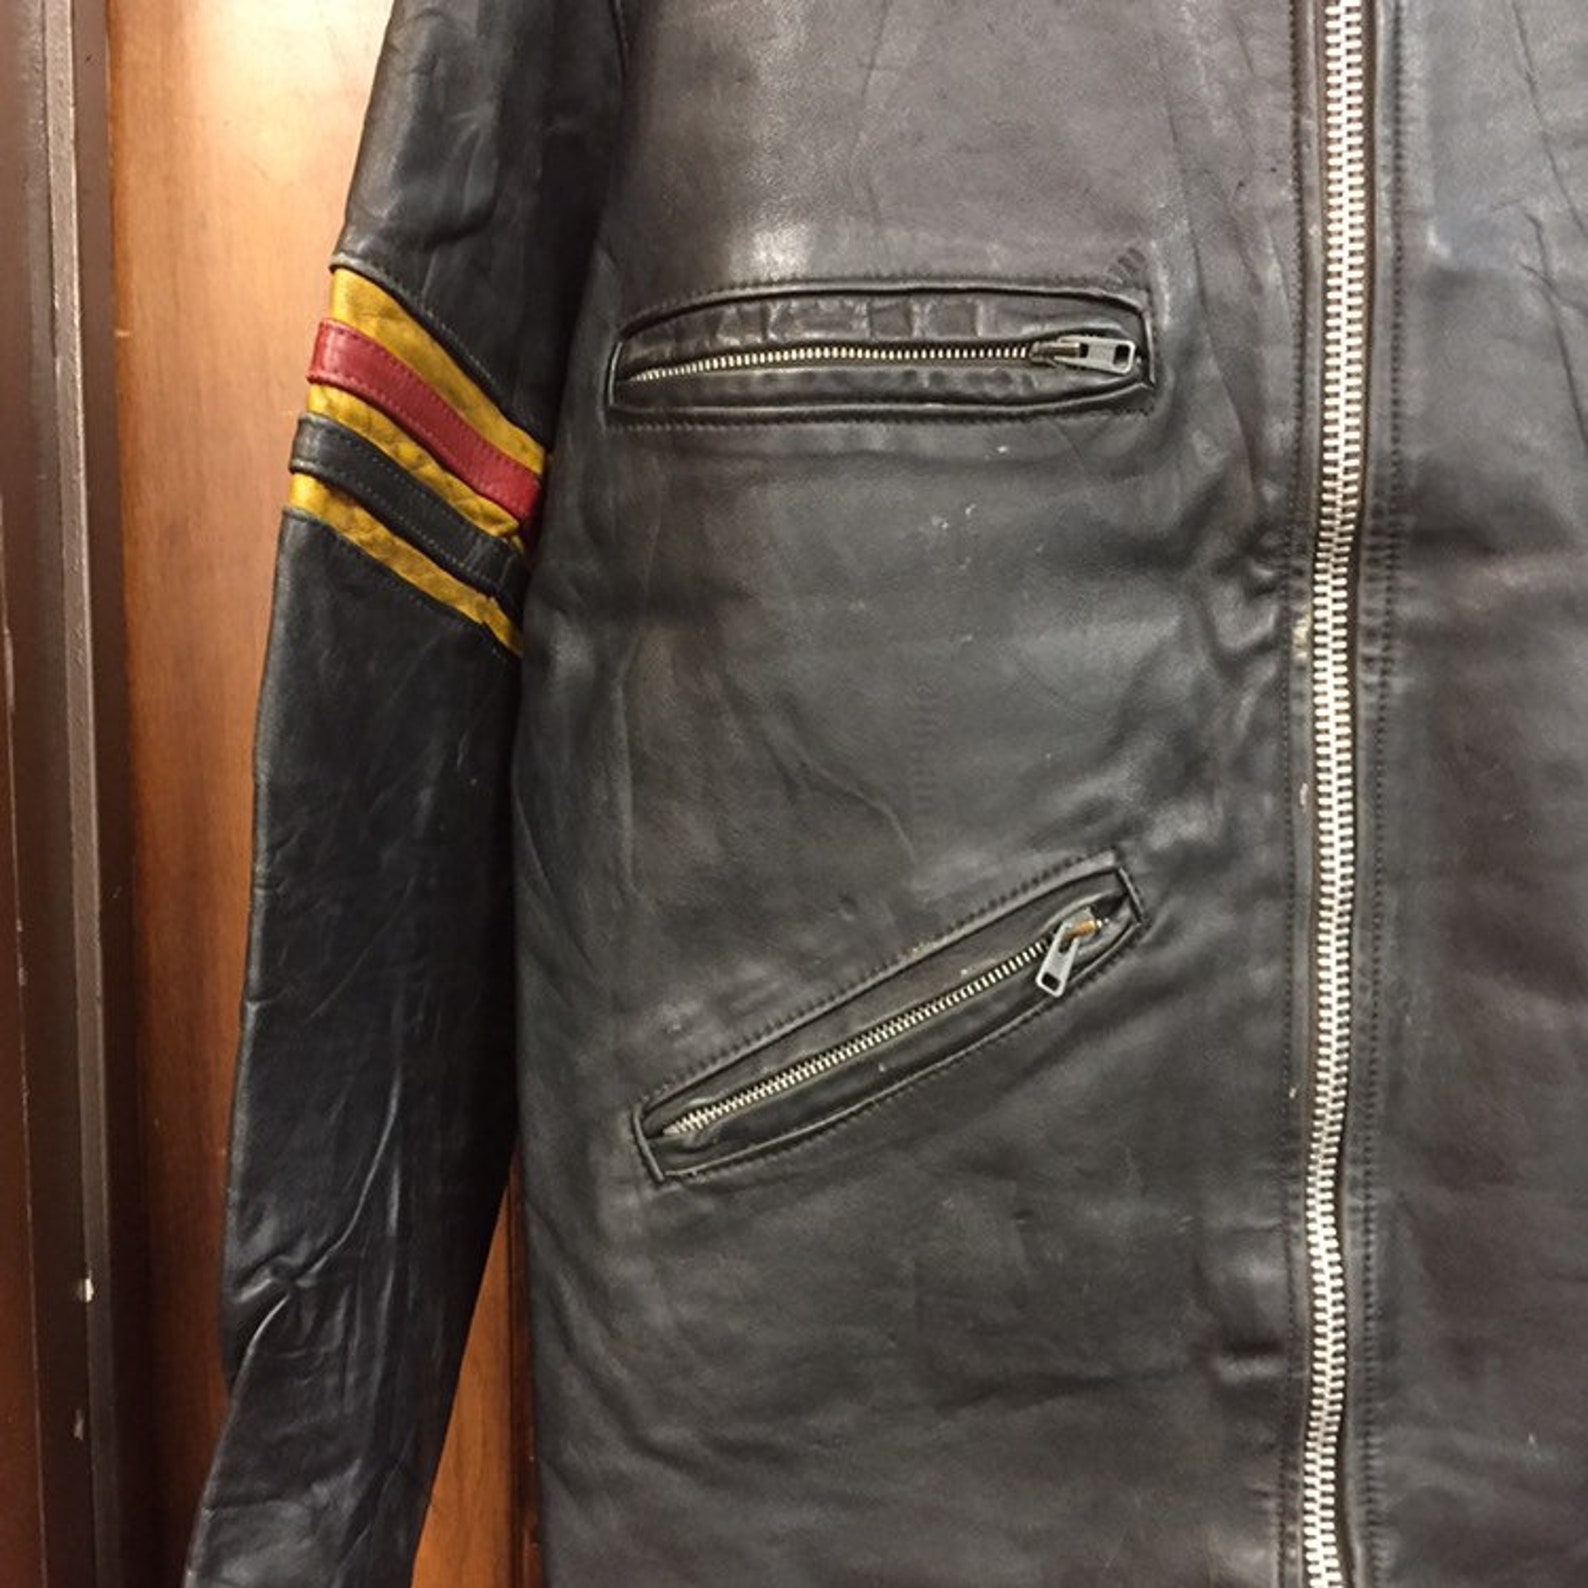 Vintage 1960s Easy Rider Style Cafe Racer Leather Jacket | Etsy